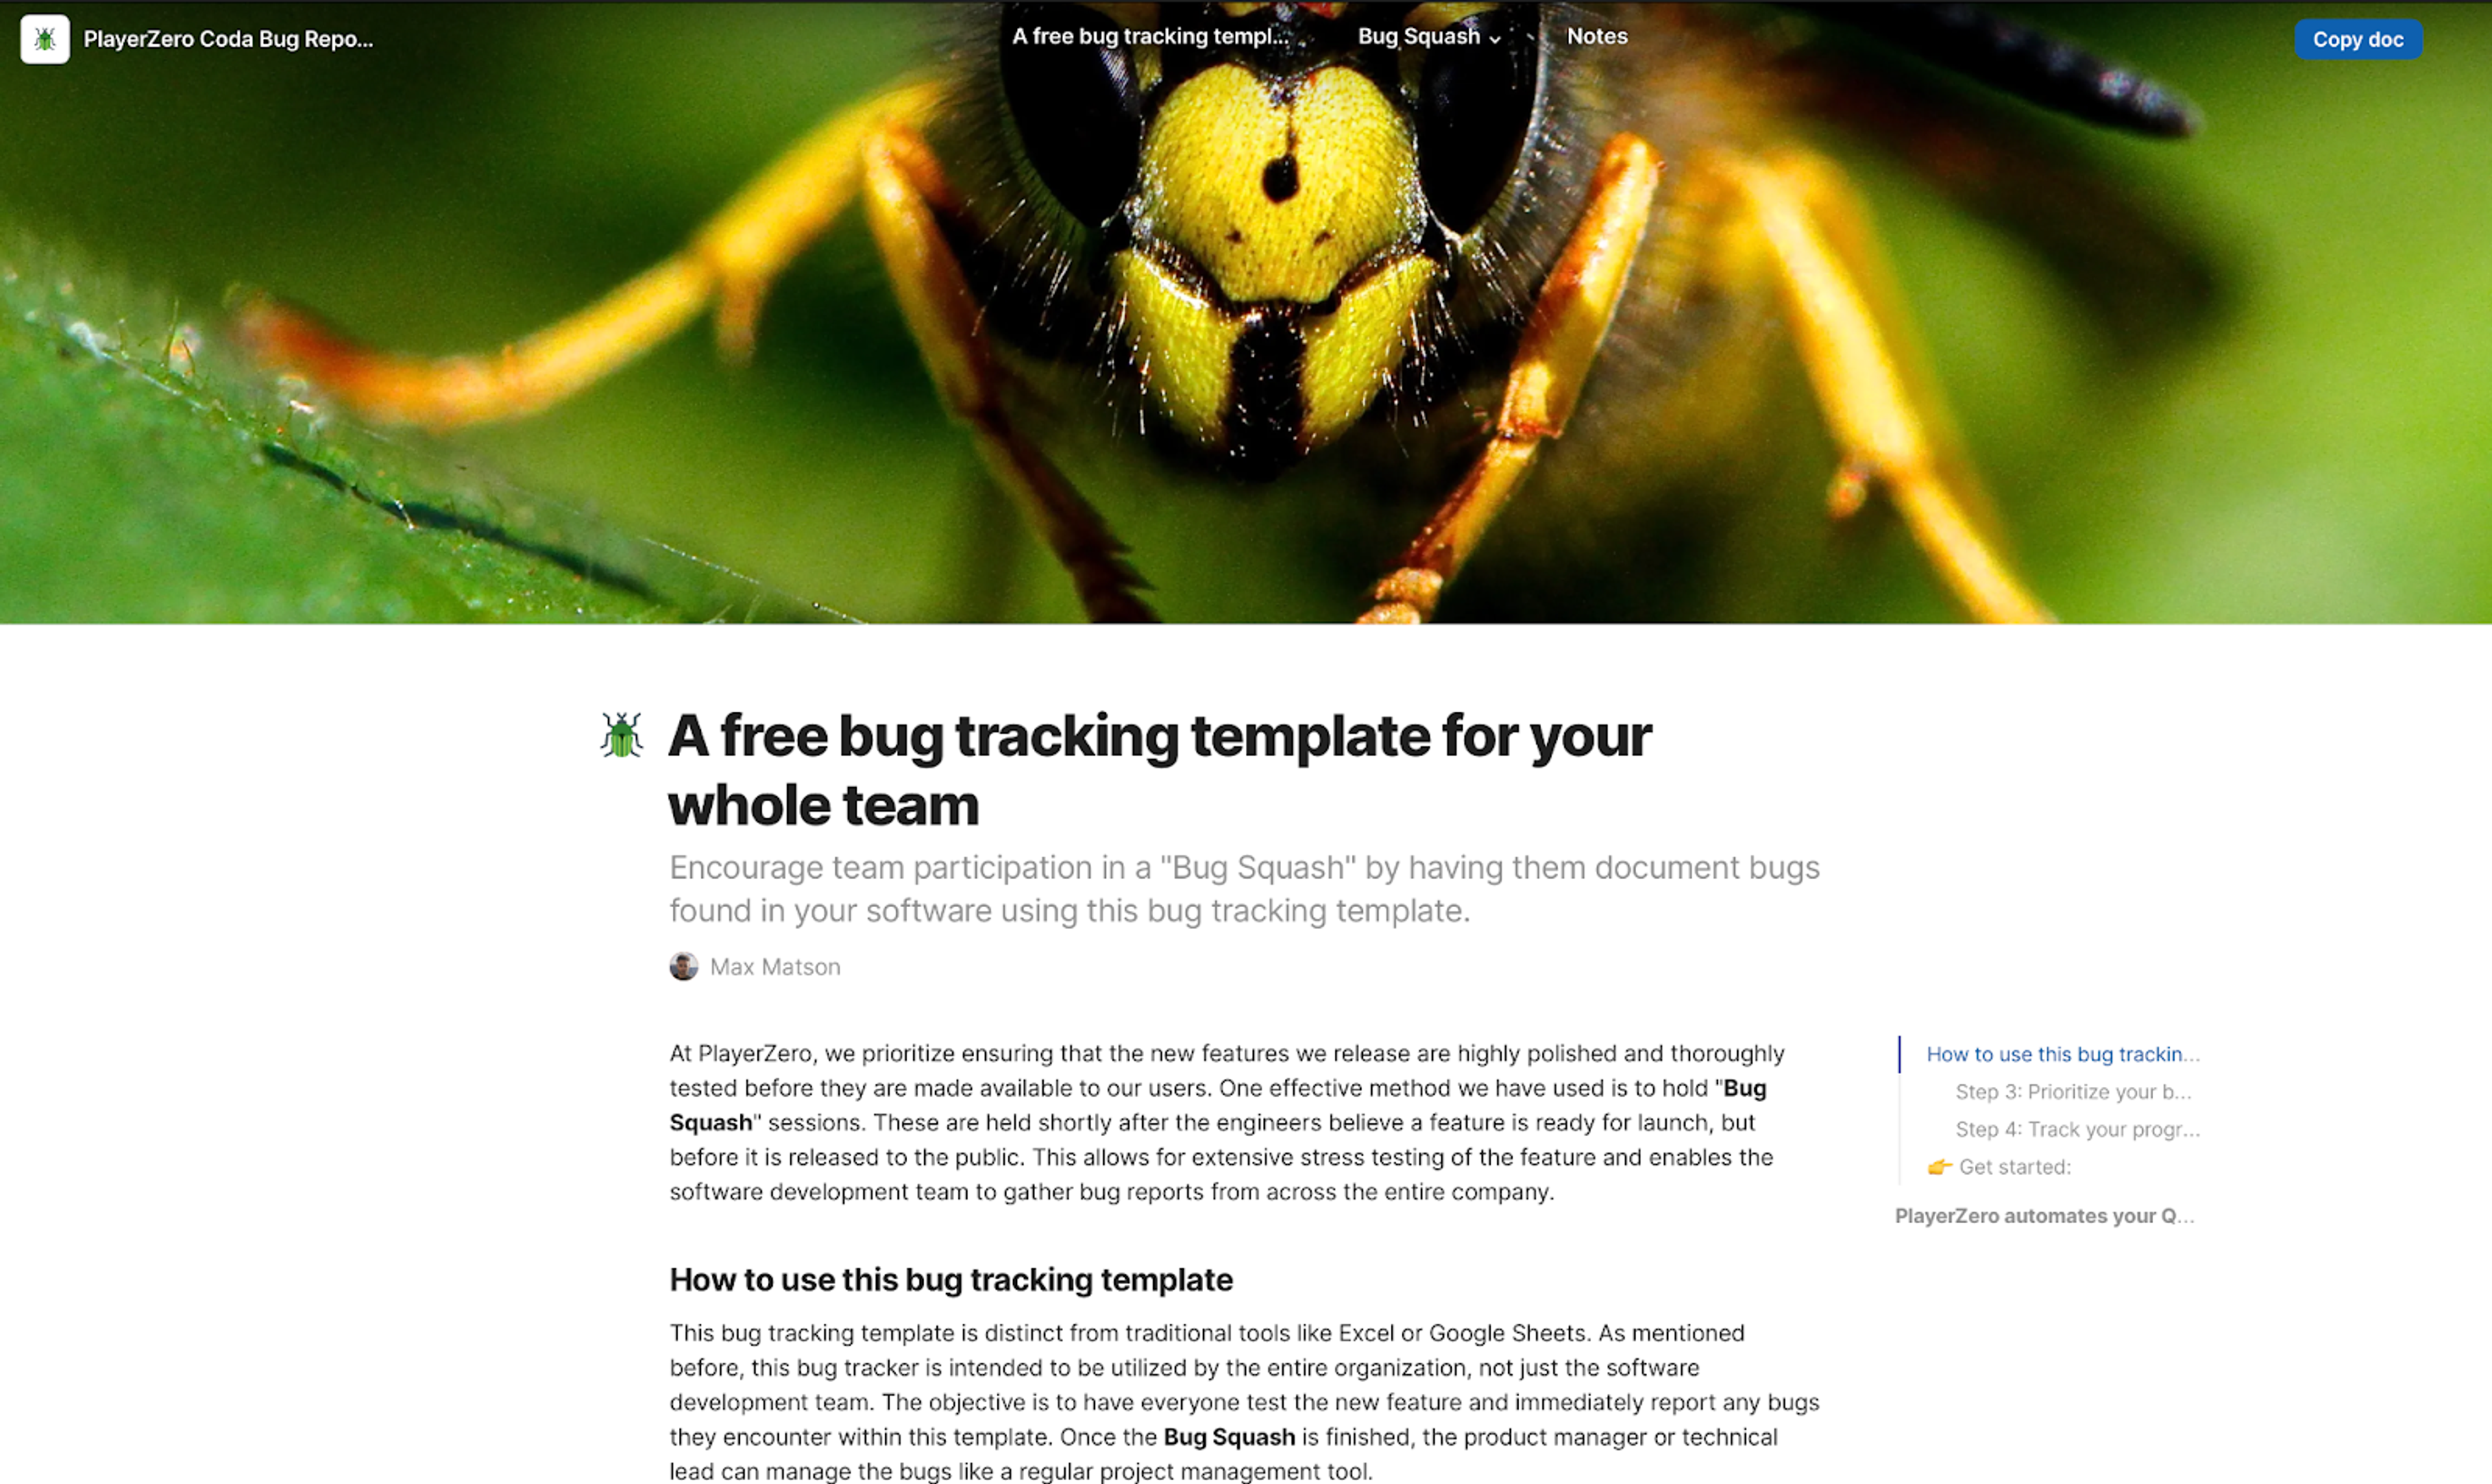 14 Bug Report Templates to Copy for Your QA Testing Workflow